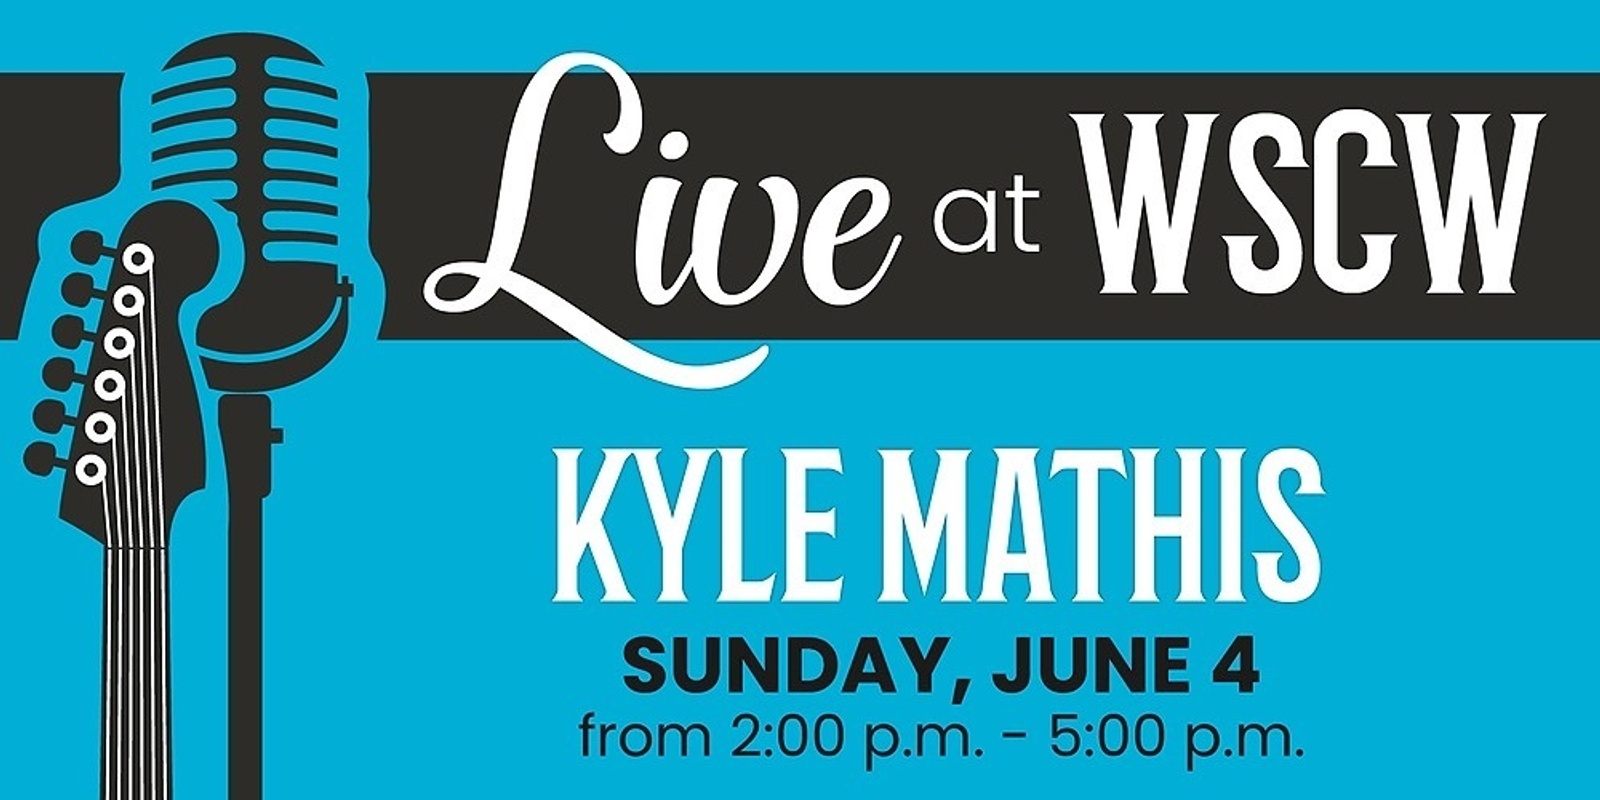 Kyle Mathis Live at WSCW June 4